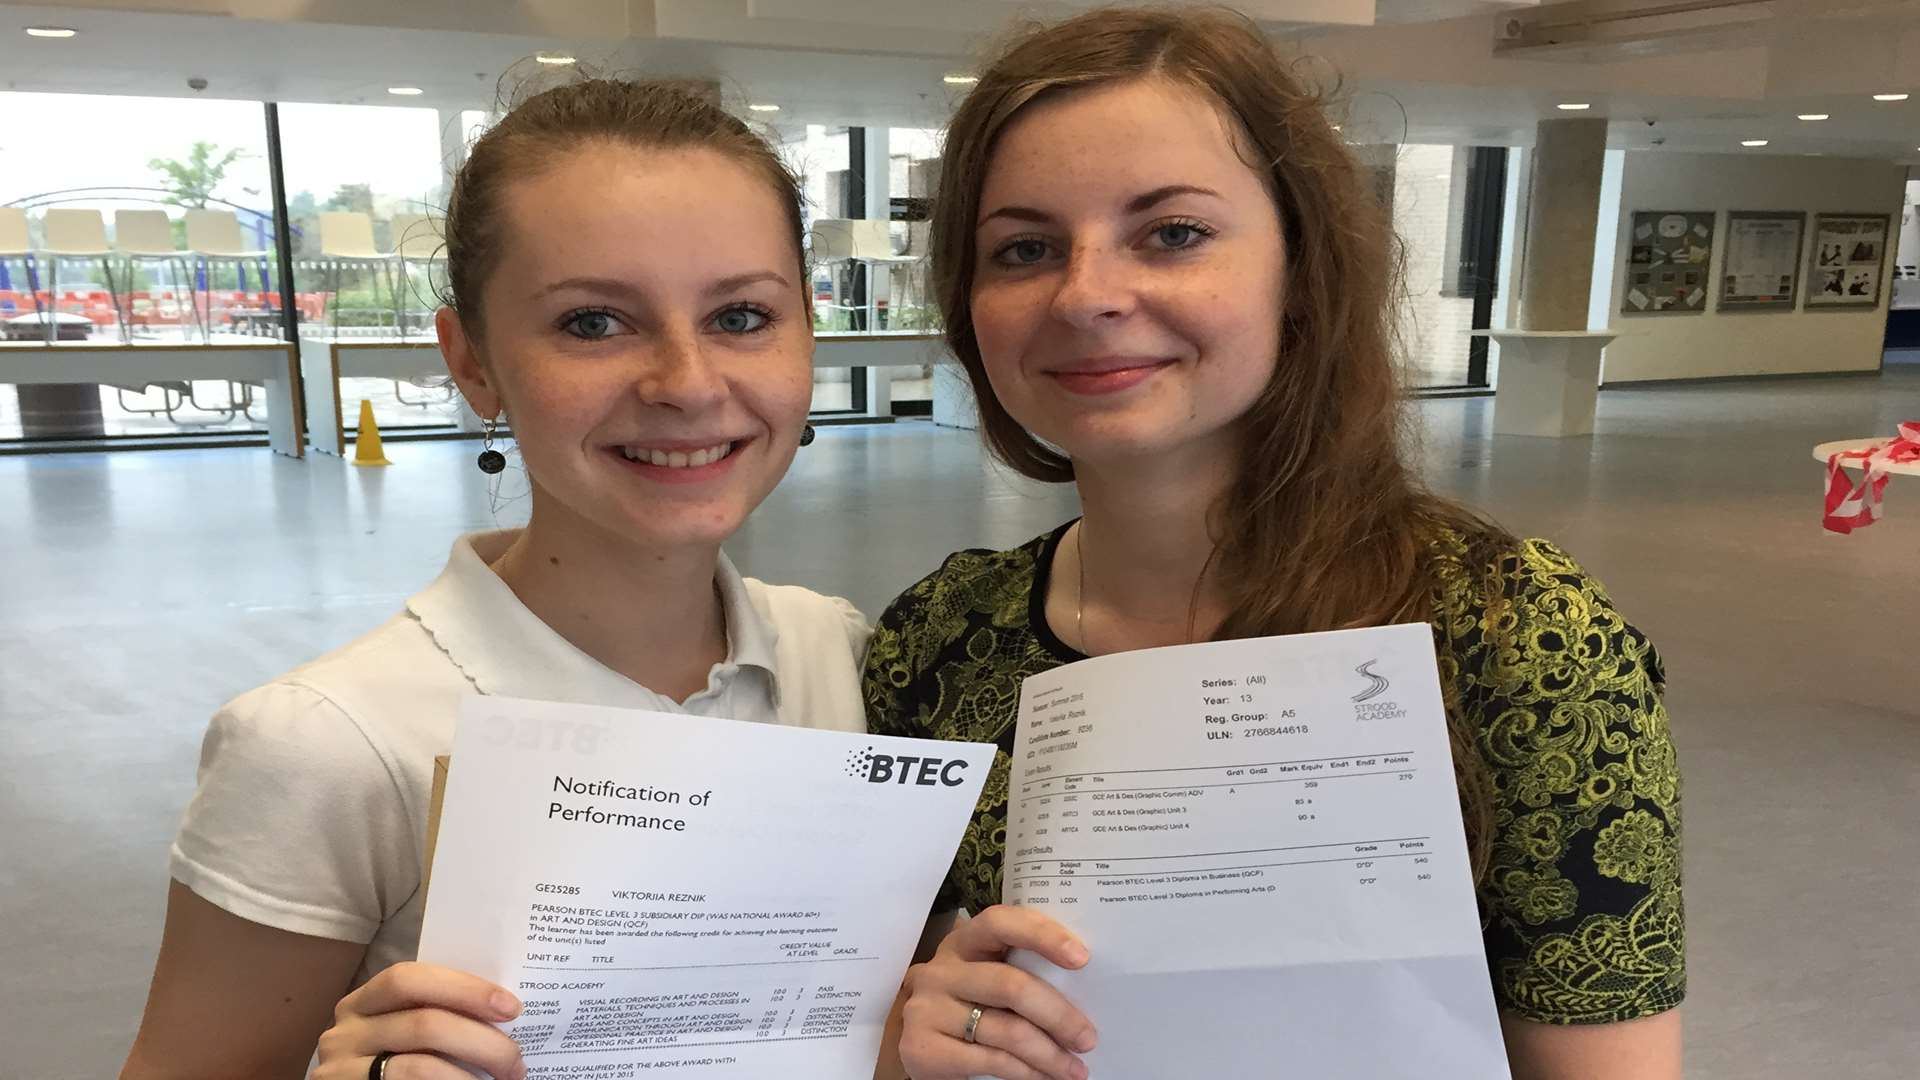 Twins Victoriia Reznik and Valeriia Reznik find out their A Level results at Strood Academy